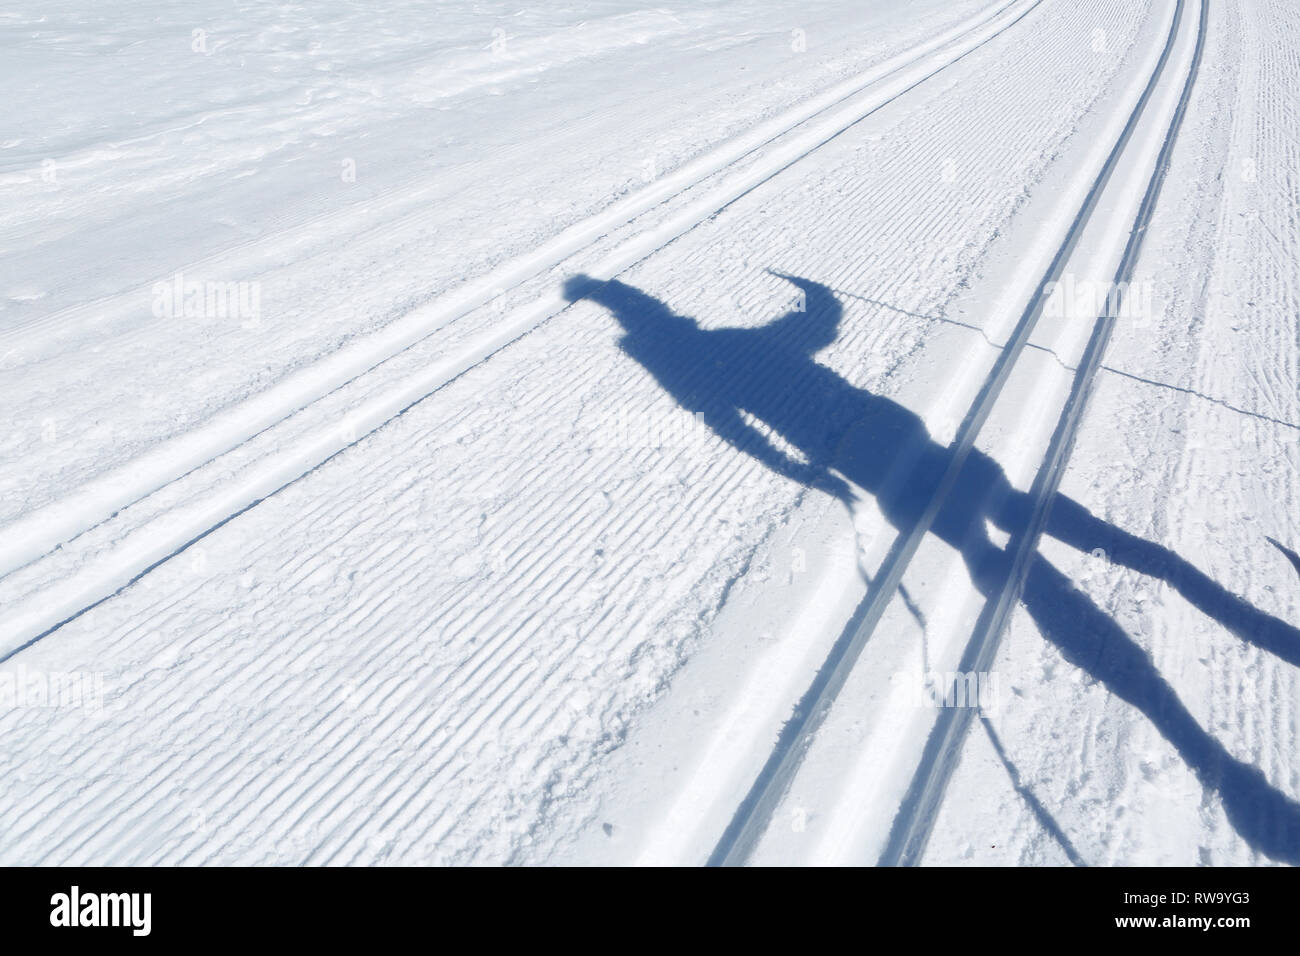 the shadow of a man in a cross-country skiing trail, San Martino di Castrozza, Trento, Italy, Europe Stock Photo